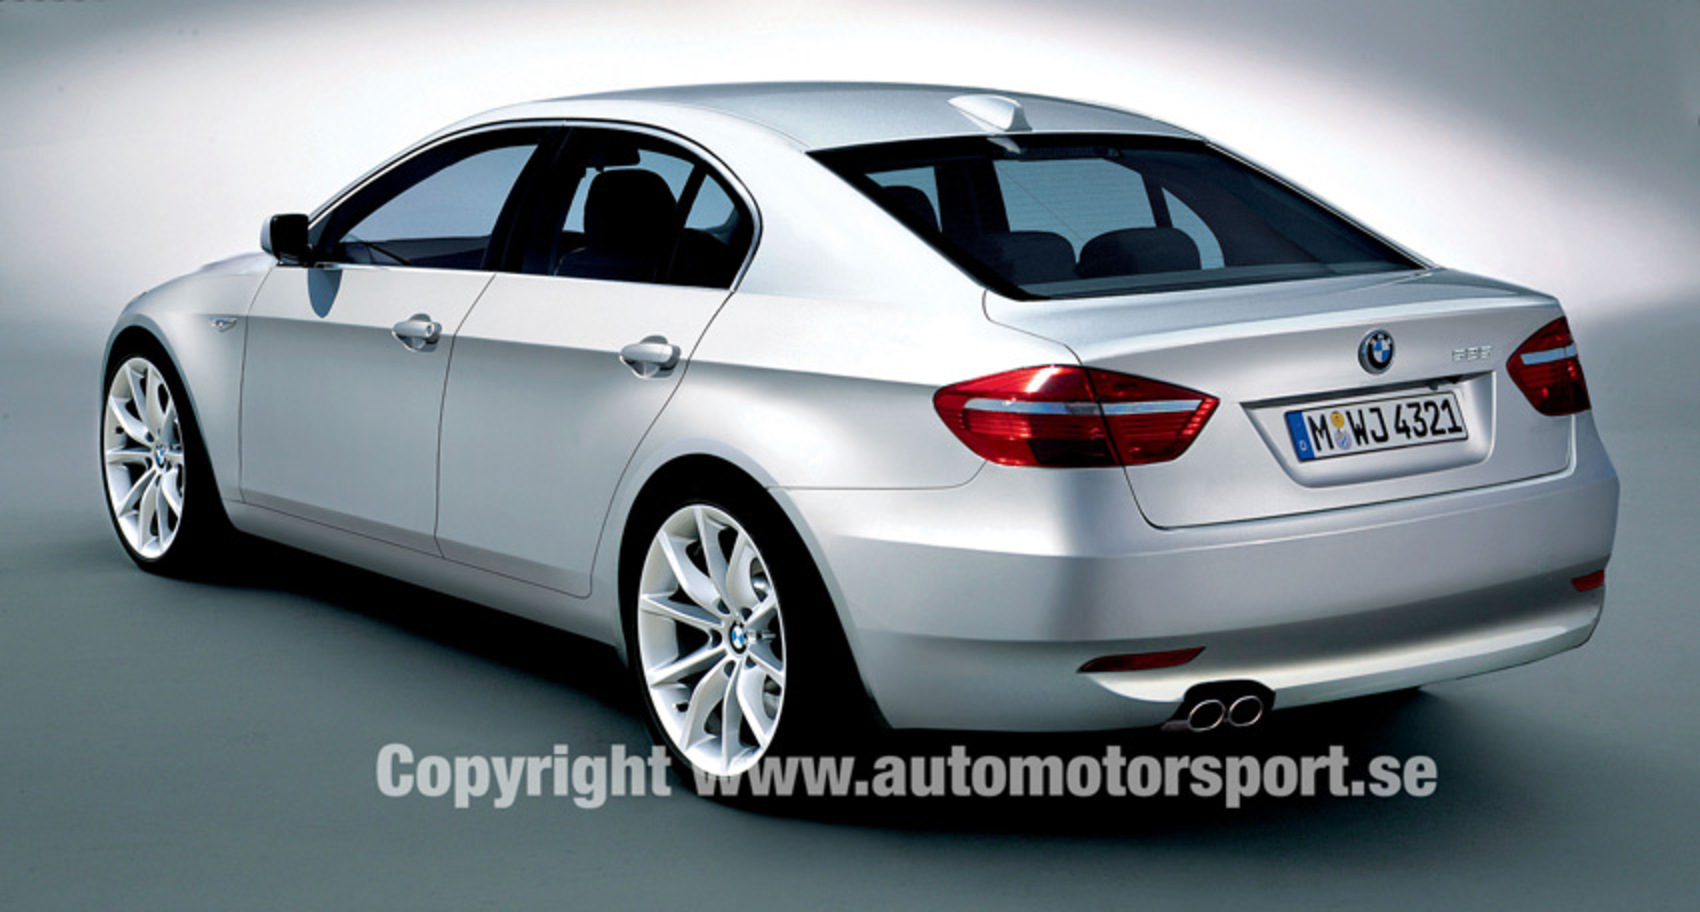 Bmw series 5 (217 comments) Views 1004 Rating 69